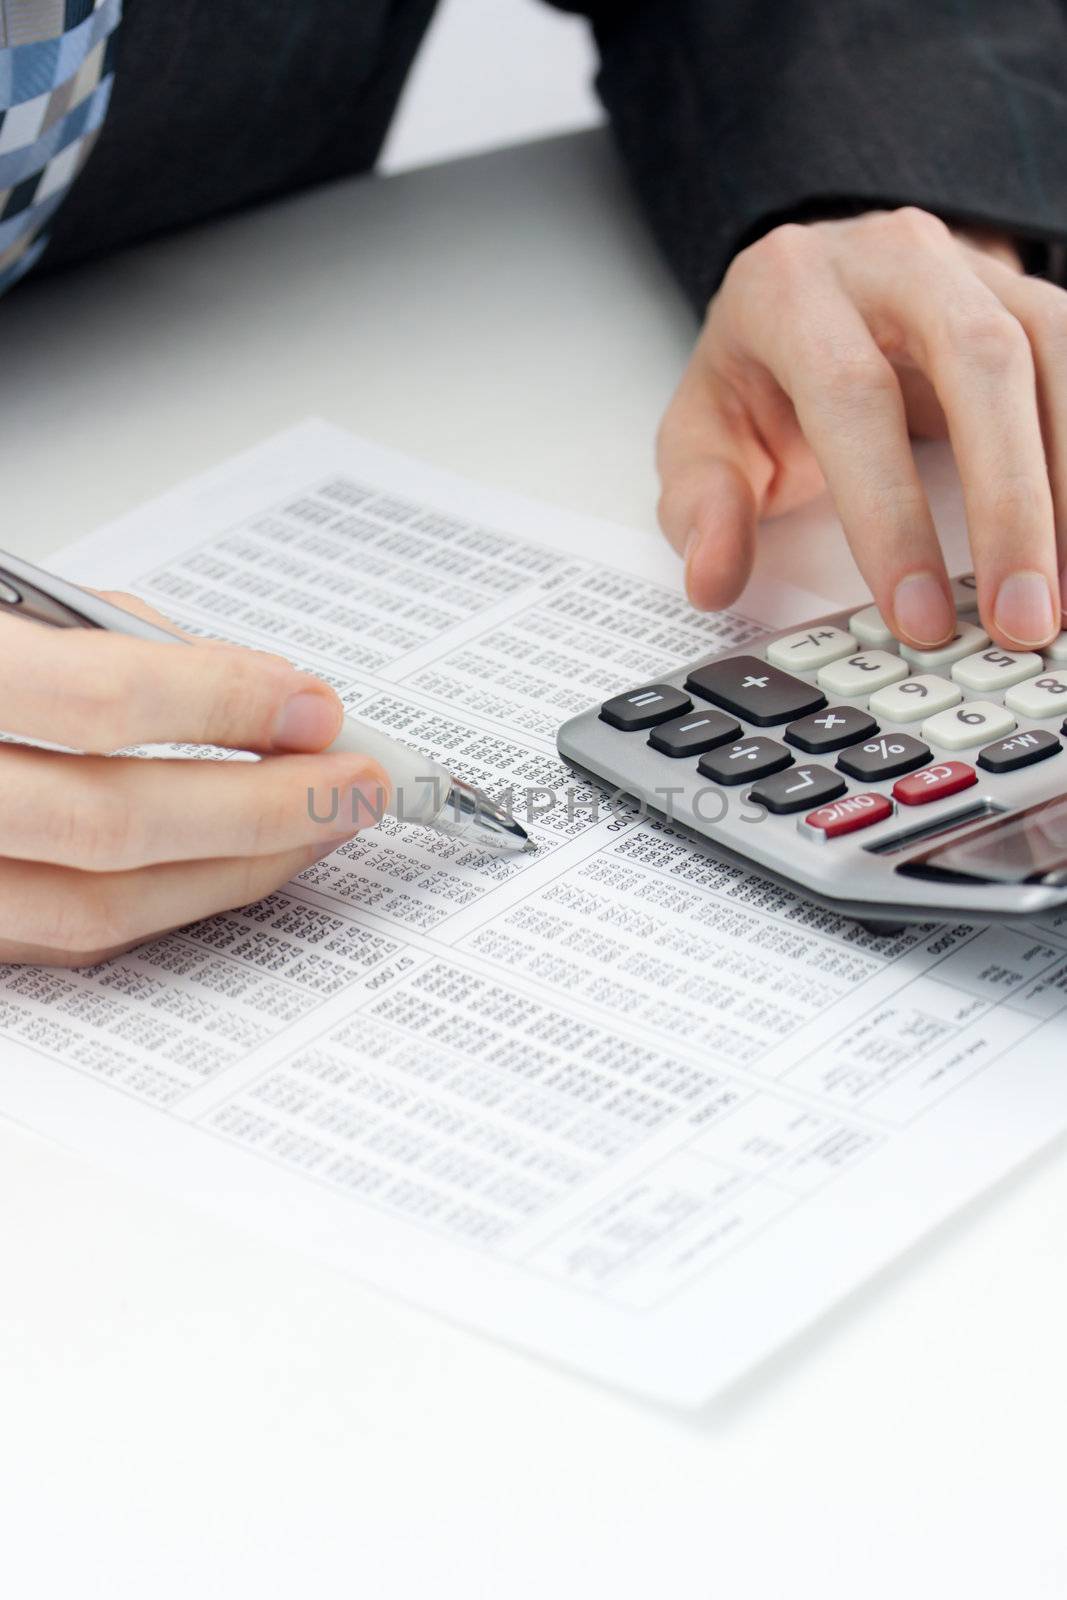 Calculating expenses, taxes and banking accounts